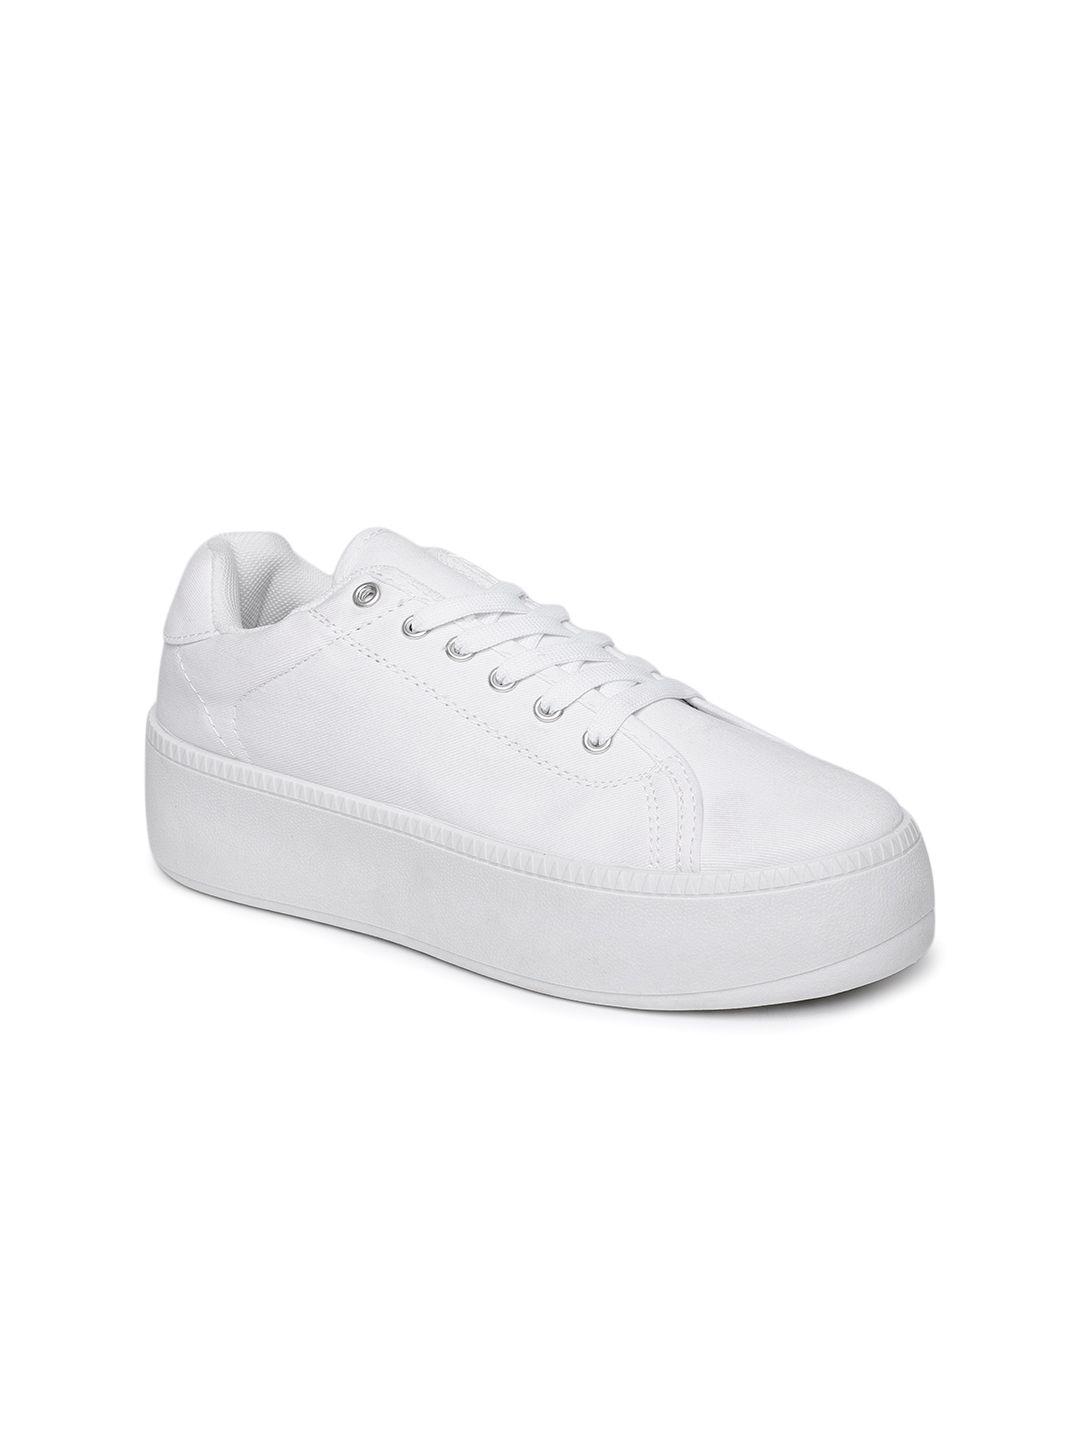 truffle collection women white sneakers